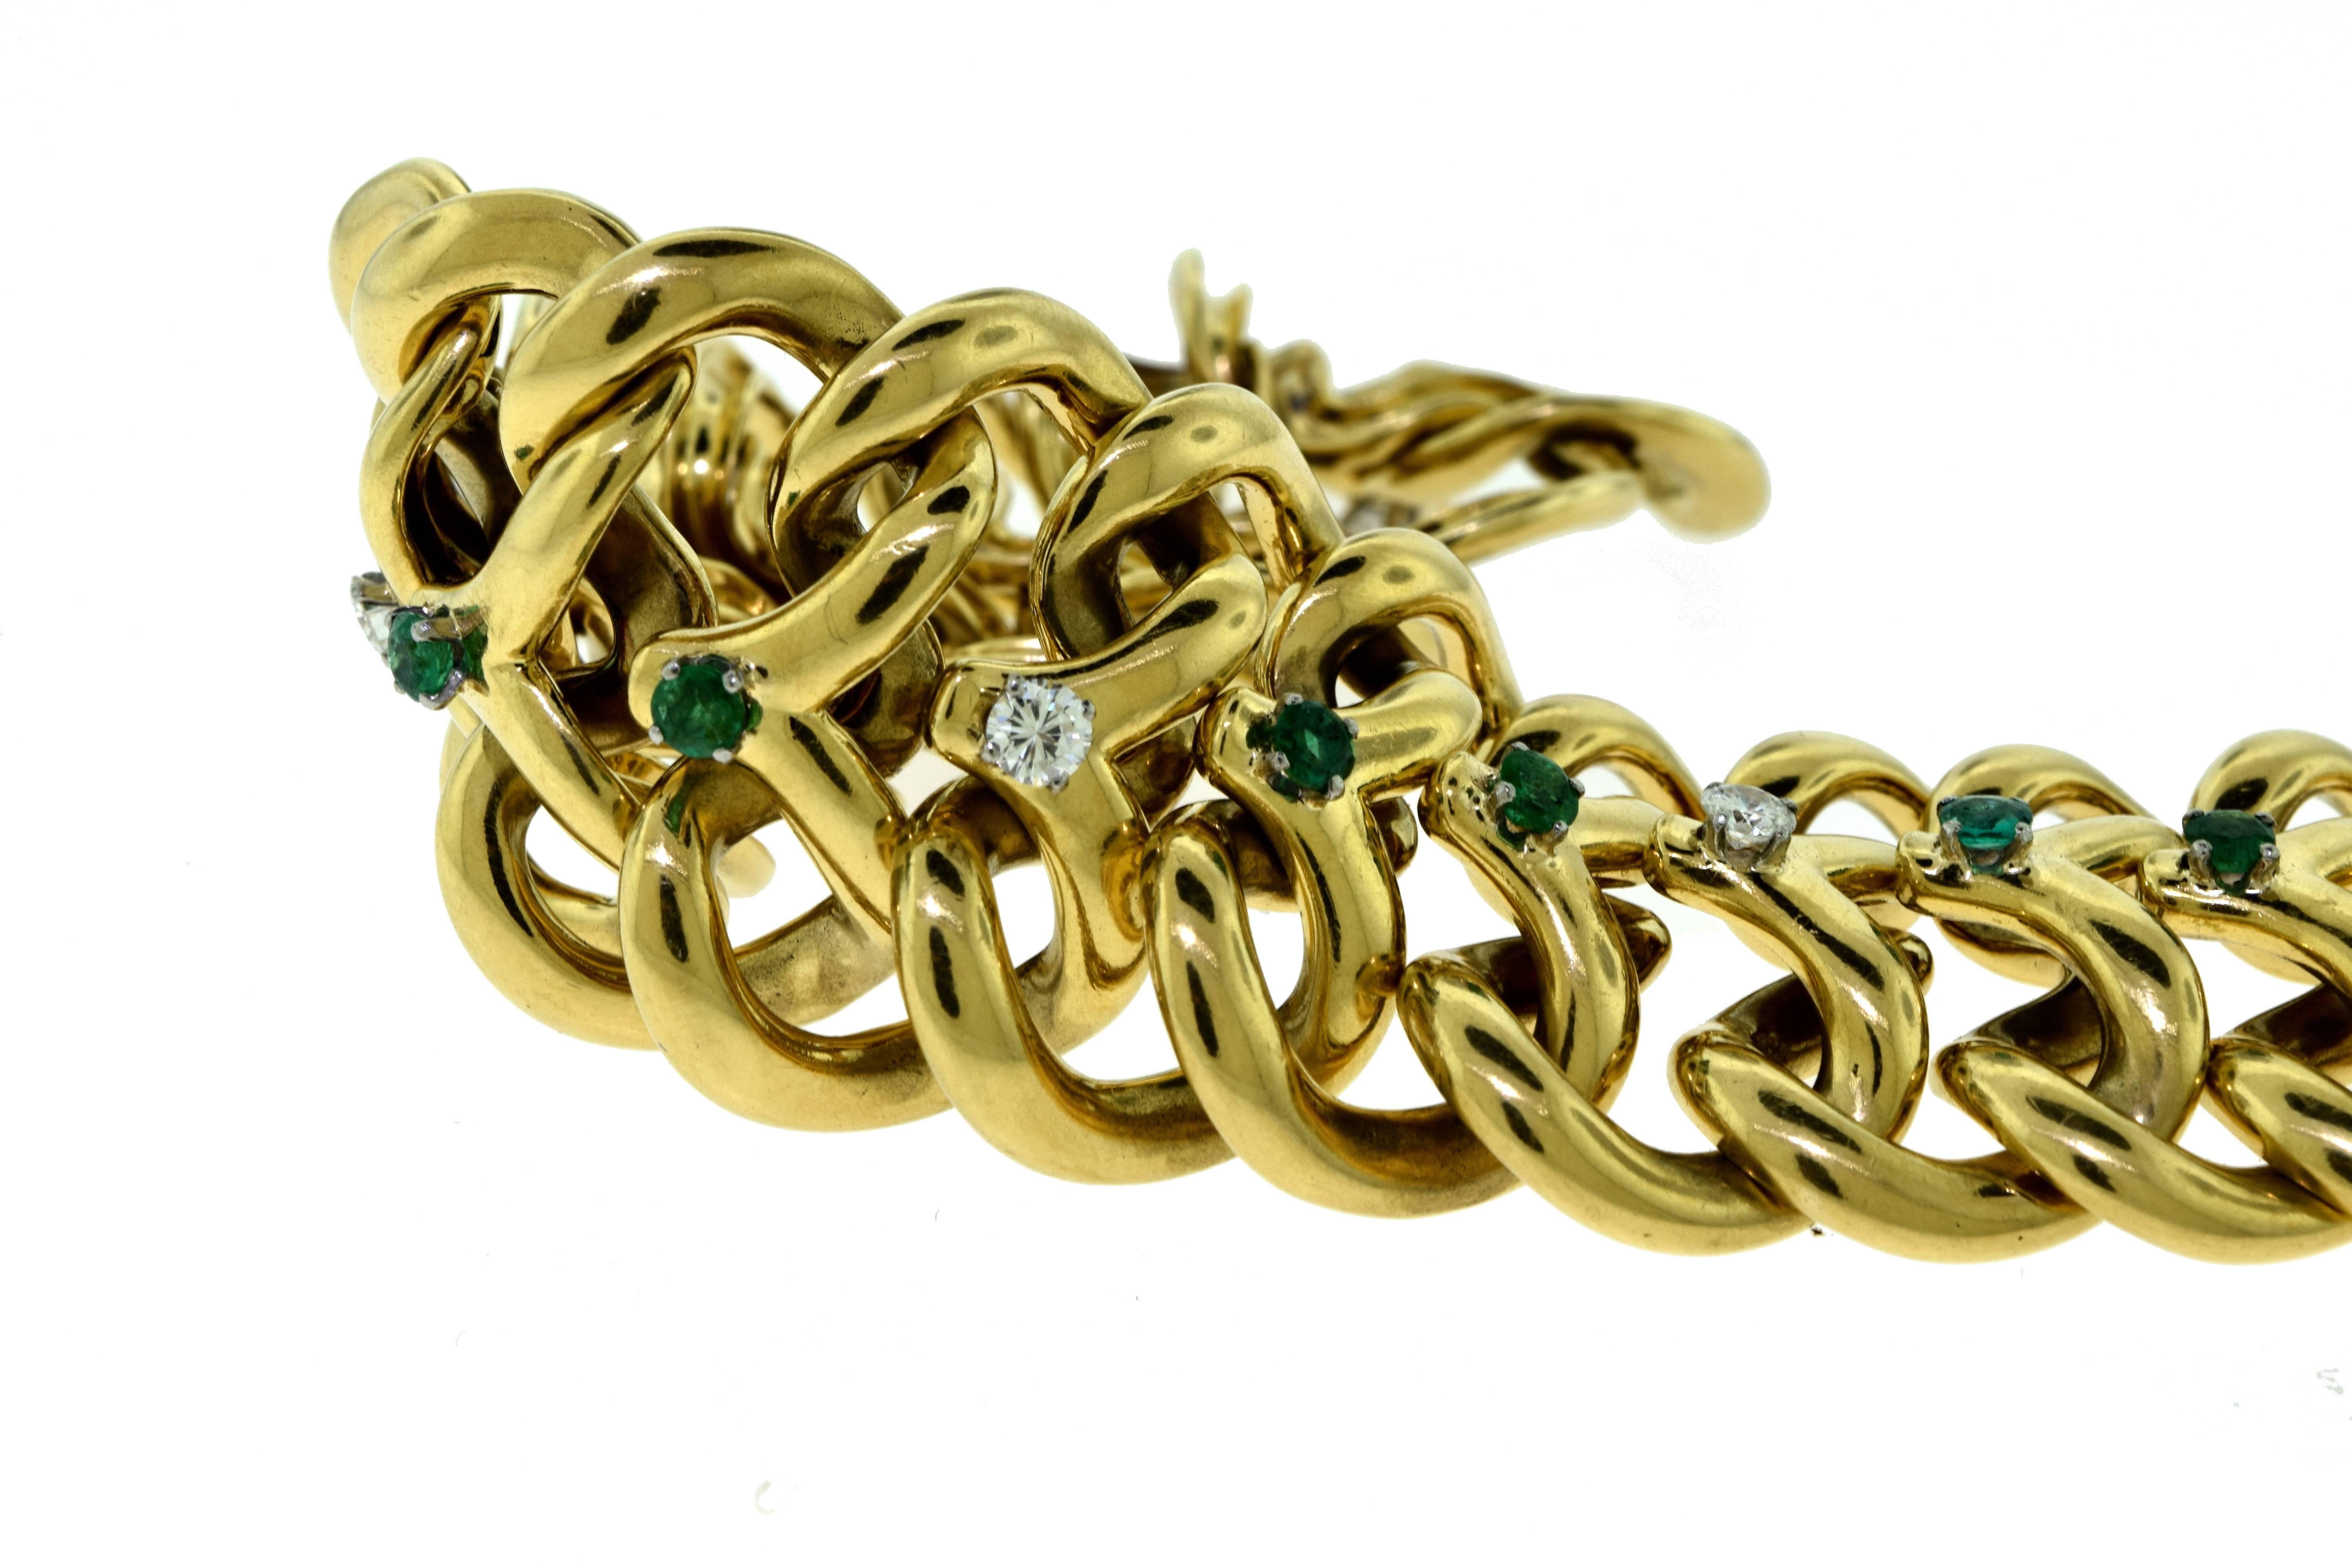 Van Cleef & Arpels Diamond and Emerald Yellow Gold Longchain Bracelet In Excellent Condition For Sale In Miami, FL